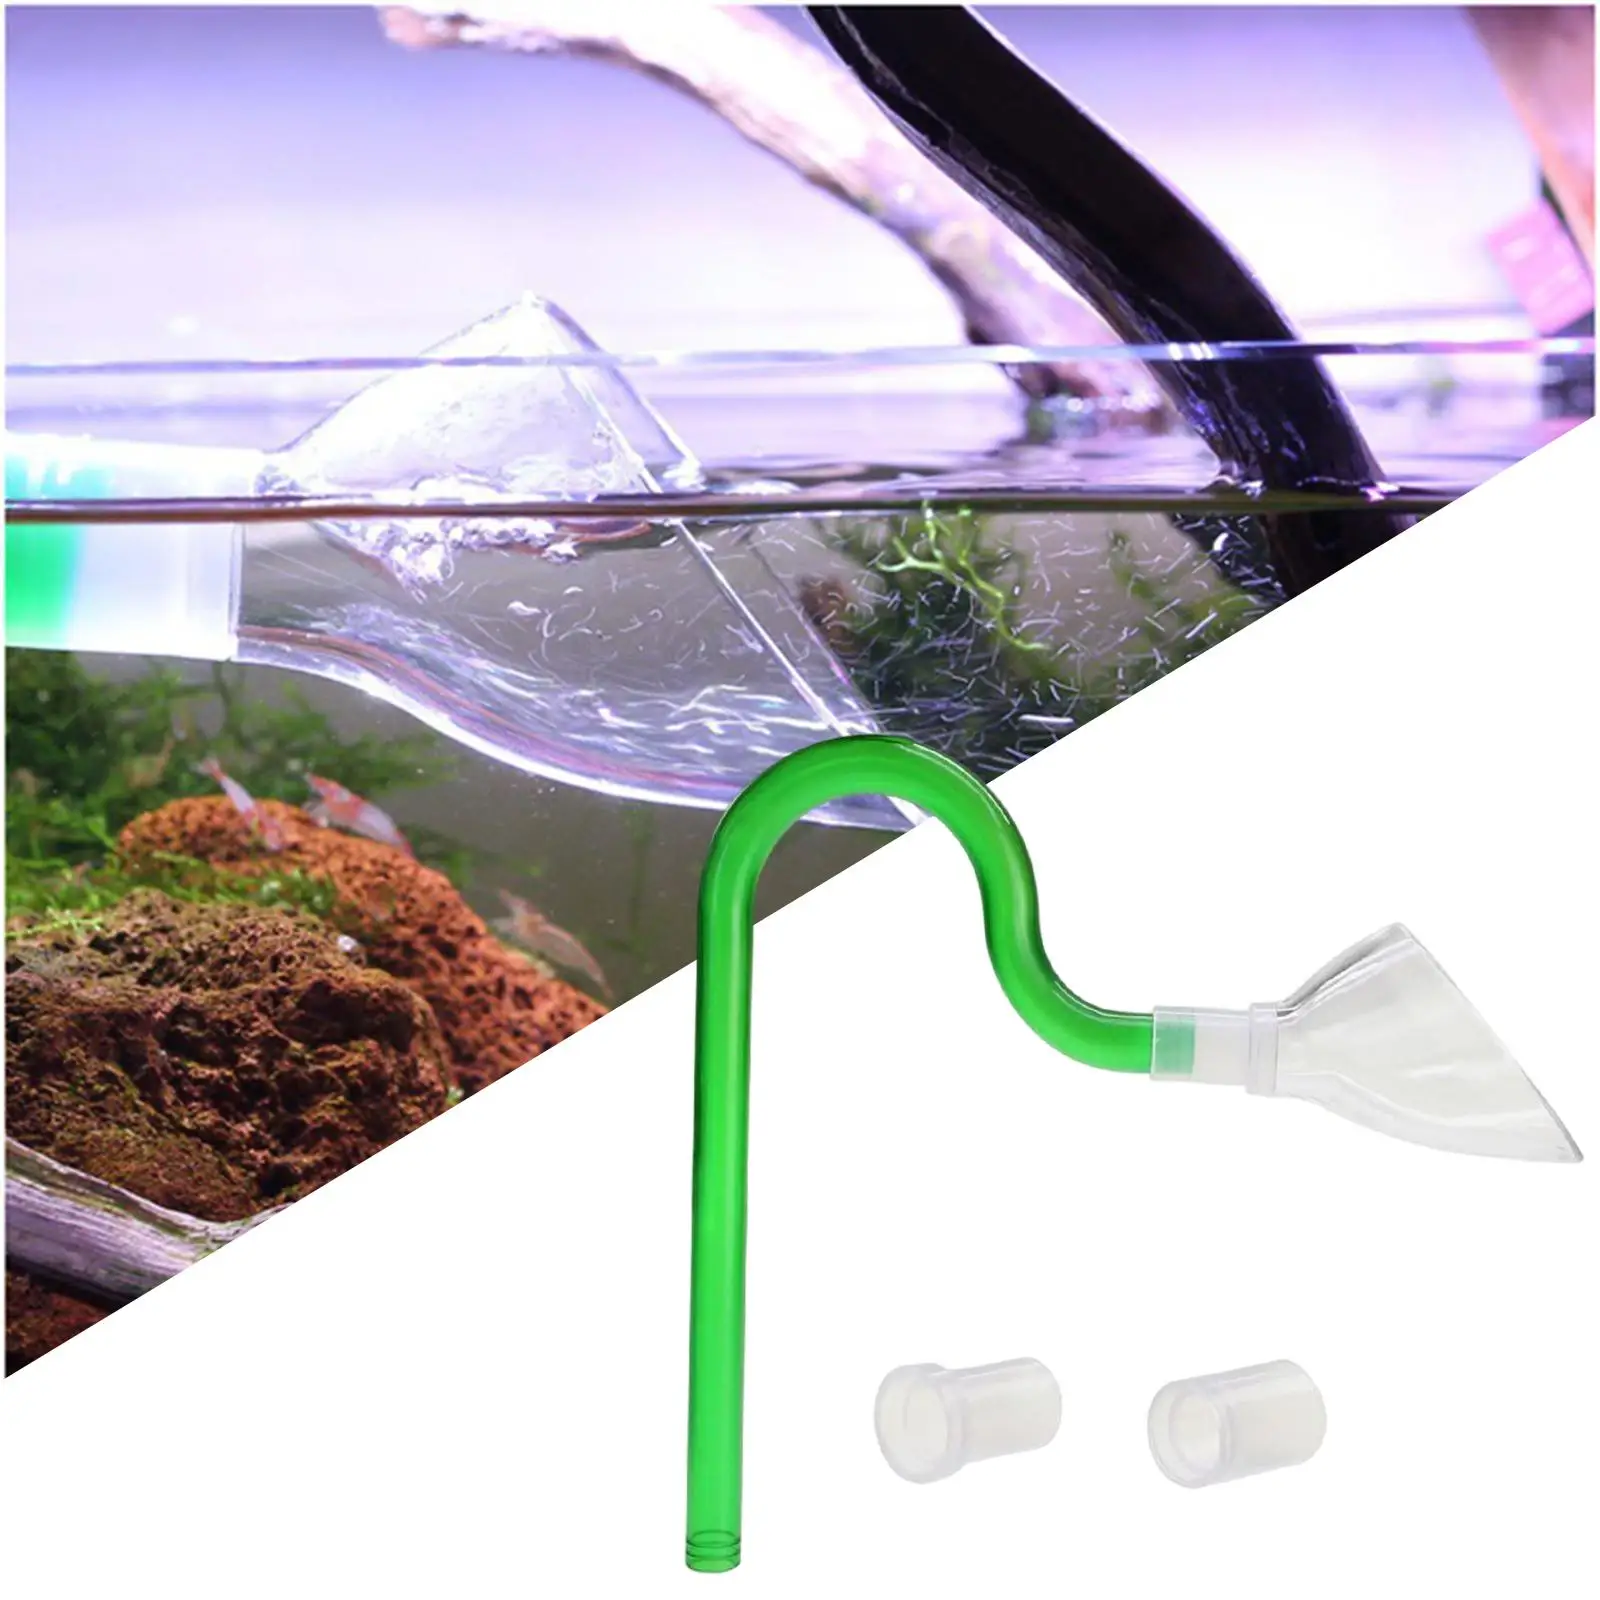 Aquarium Lily Pipe Outflow Connector Adjustable Supplies for Aquatic Filter System Planted Tank Water Tank Surface Freshwater